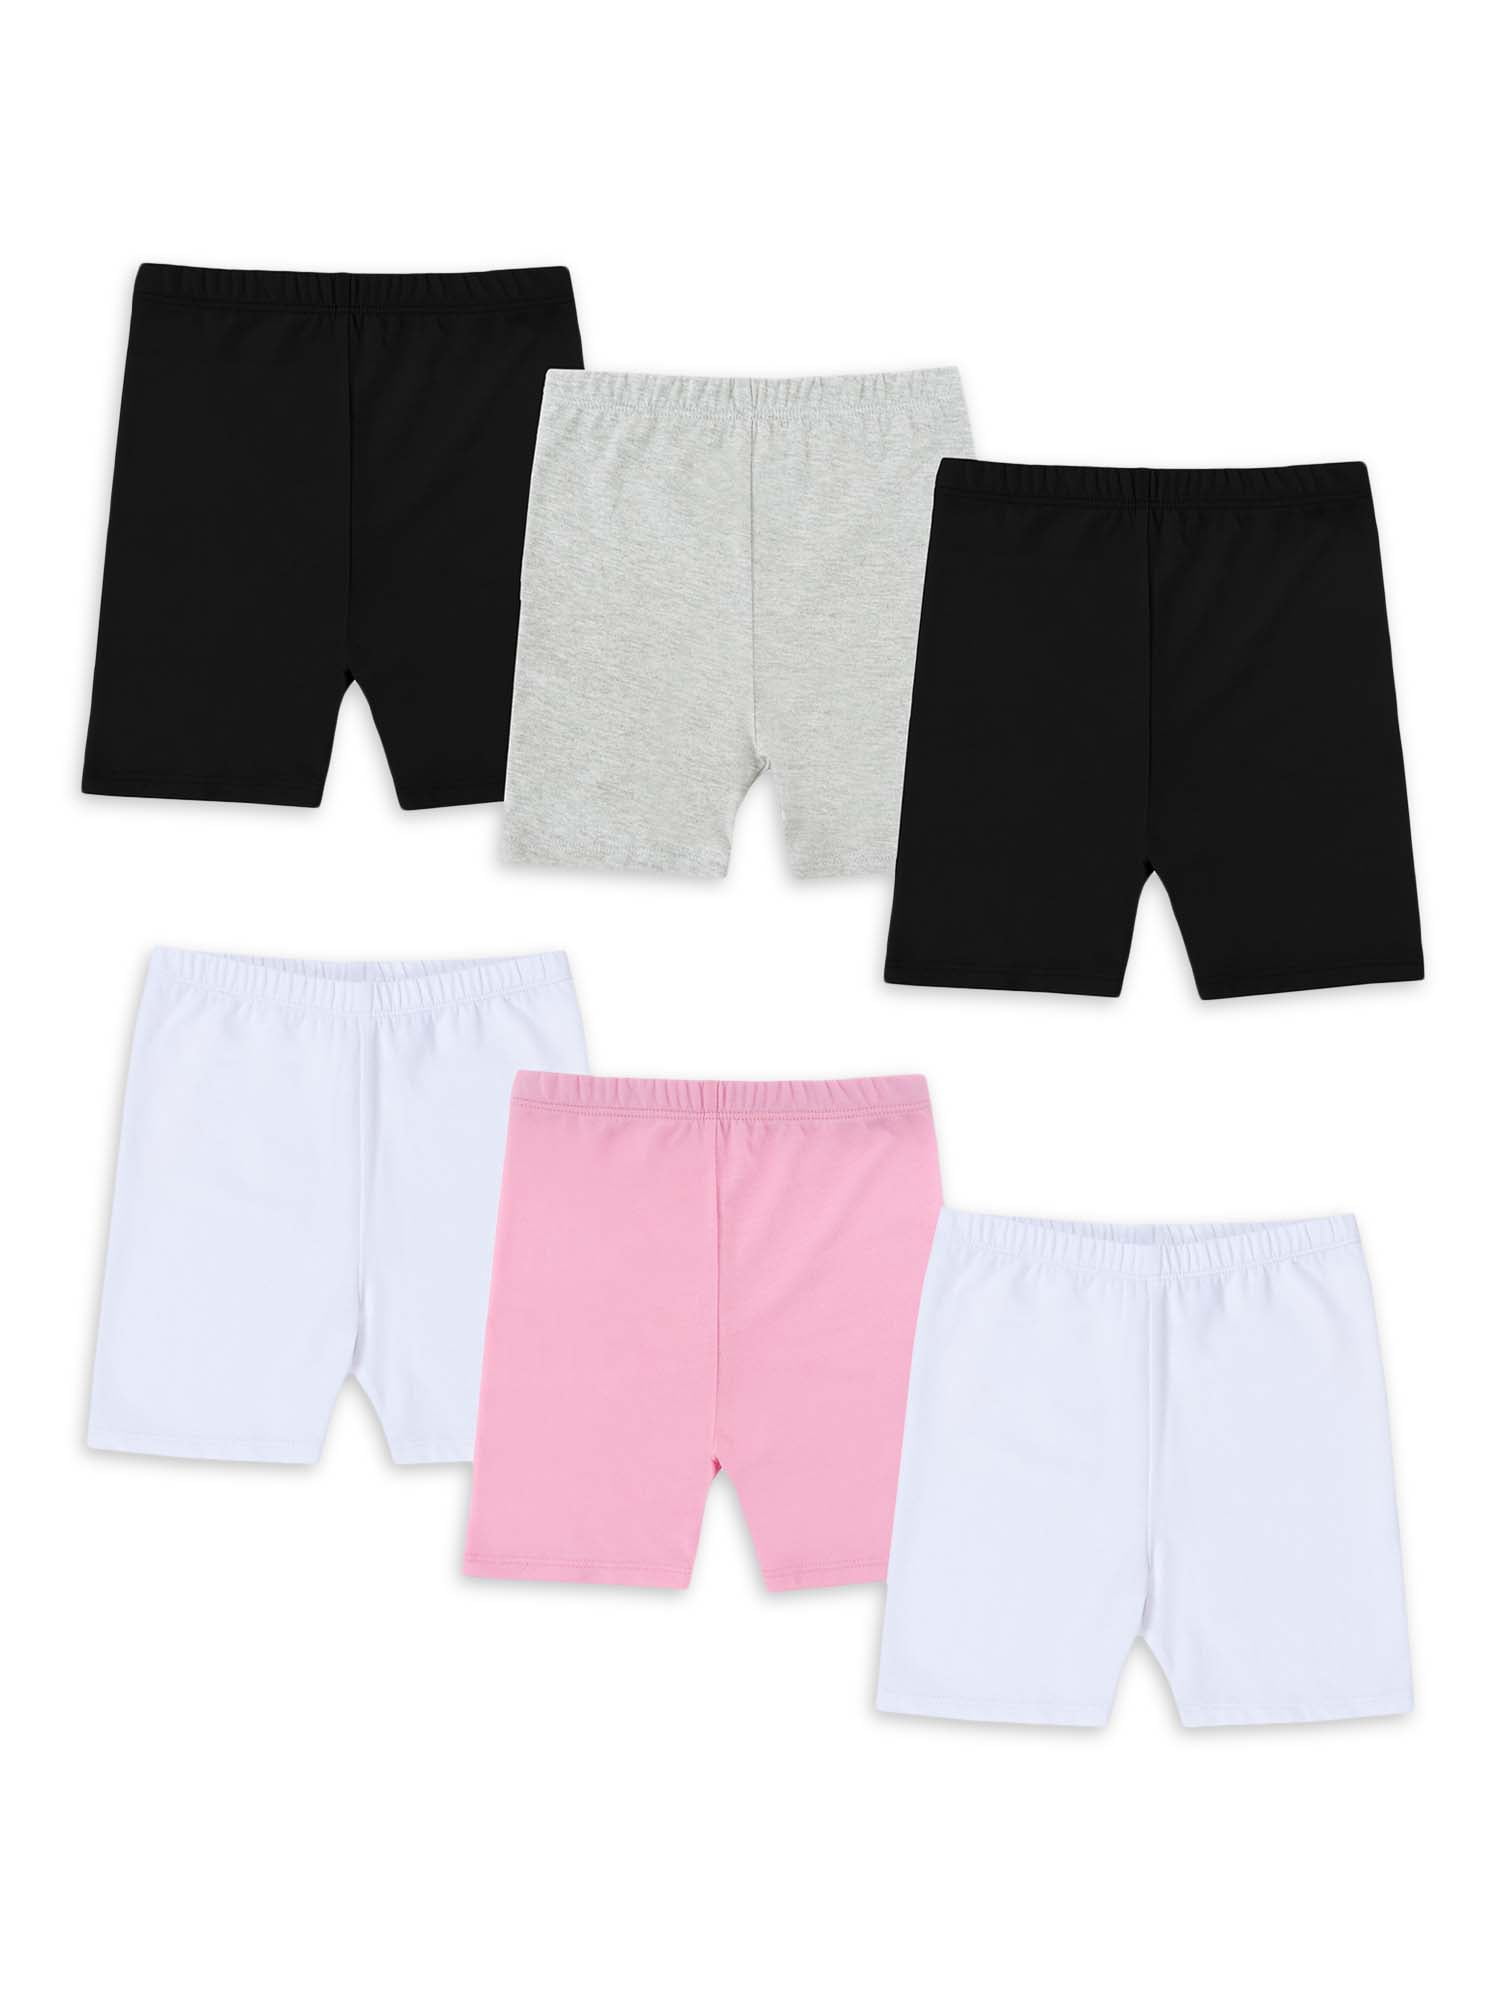 6-Pack Wonder Nation Toddler Girl Play Shorts (Various Colors, Sizes 2T-5T) $8 + Free Shipping w/ Walmart+ or Free Store Pickup